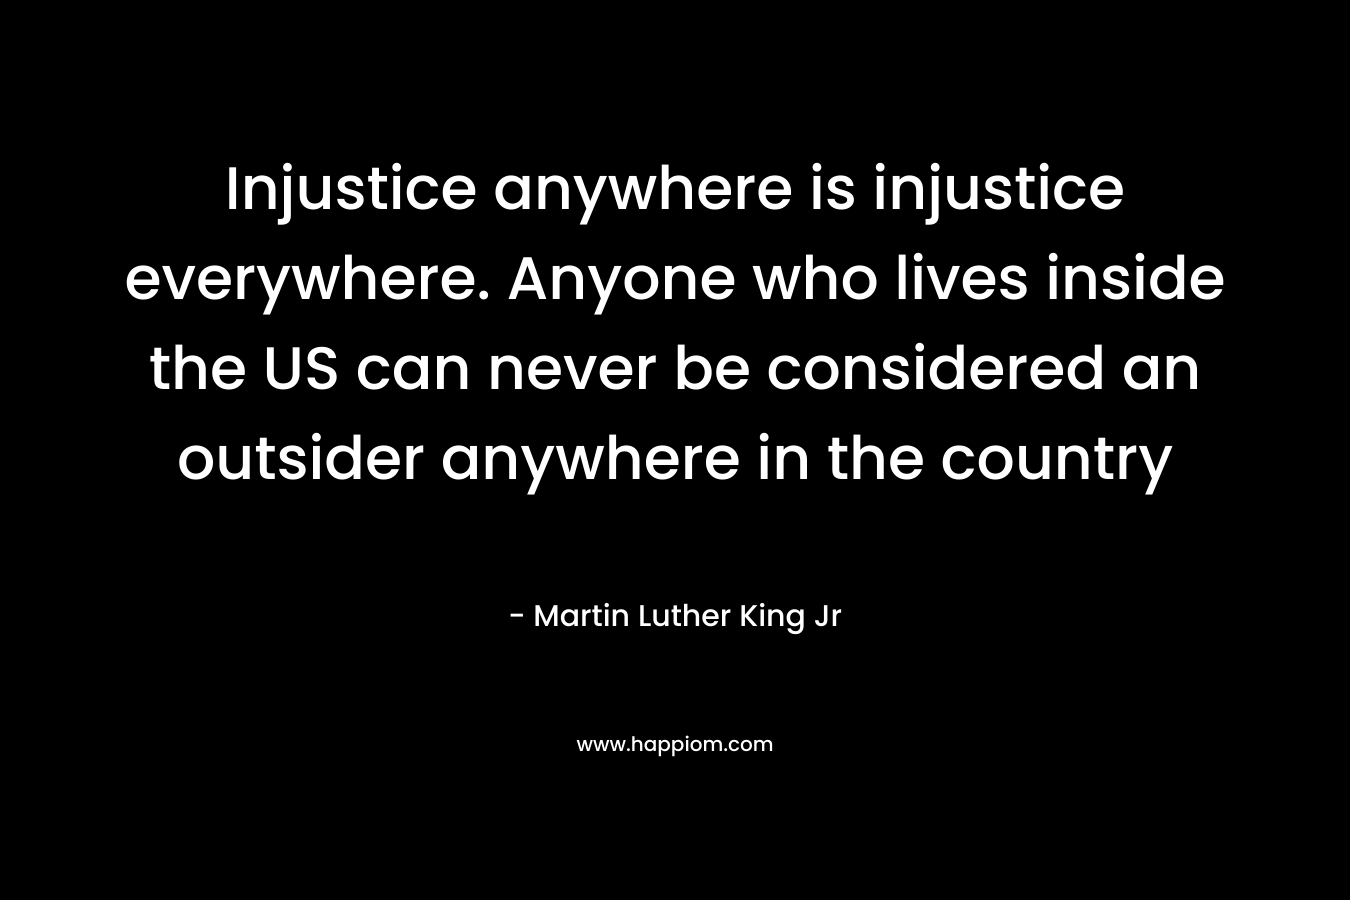 Injustice anywhere is injustice everywhere. Anyone who lives inside the US can never be considered an outsider anywhere in the country